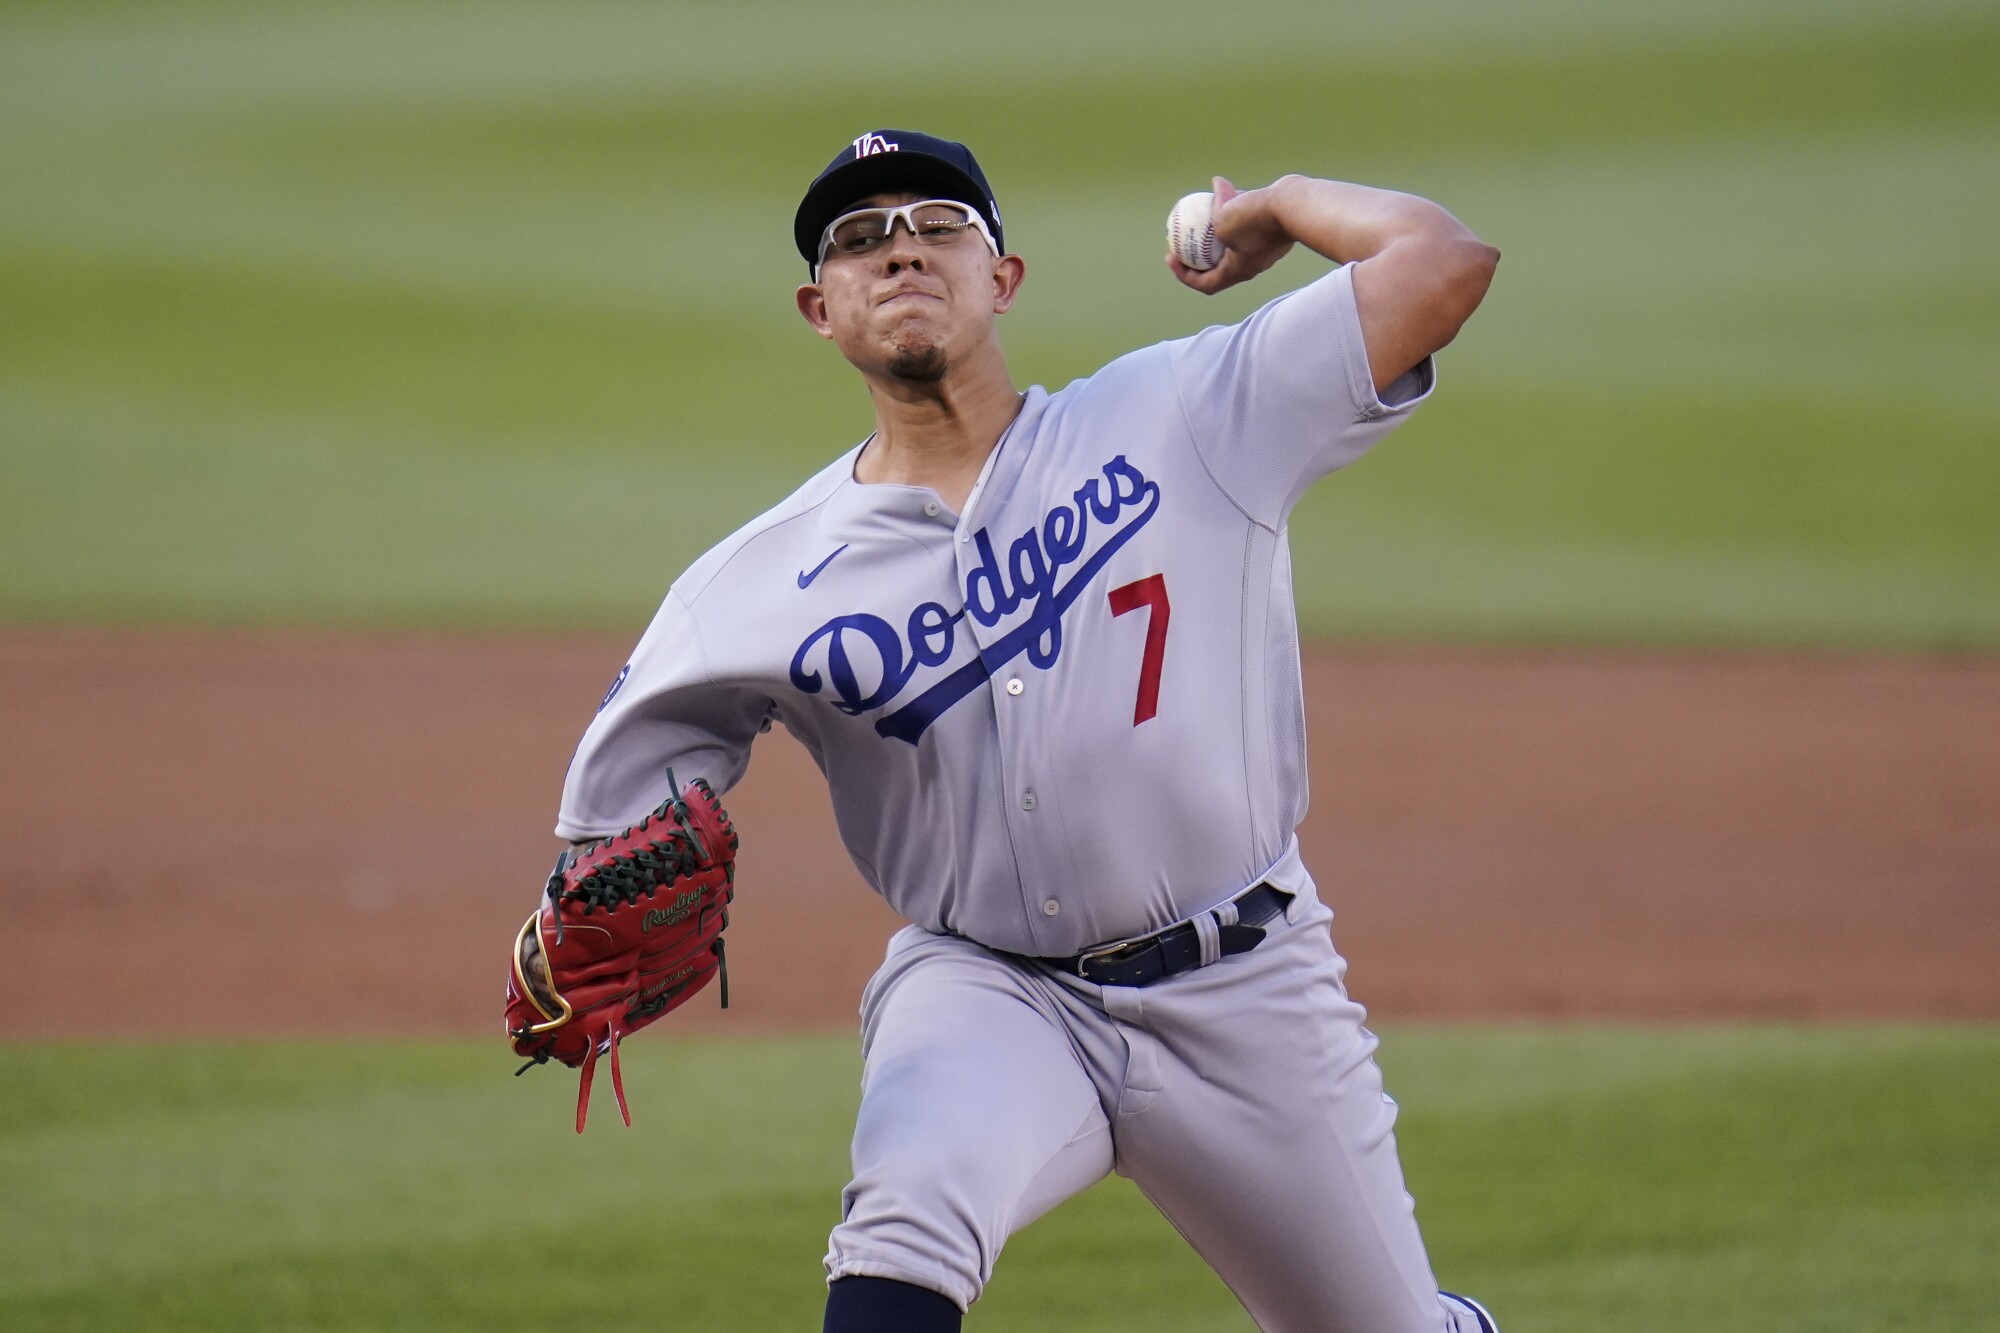 Los Angeles Dodgers starting pitcher Julio Urias throws a pitch to the Washington Nationals.